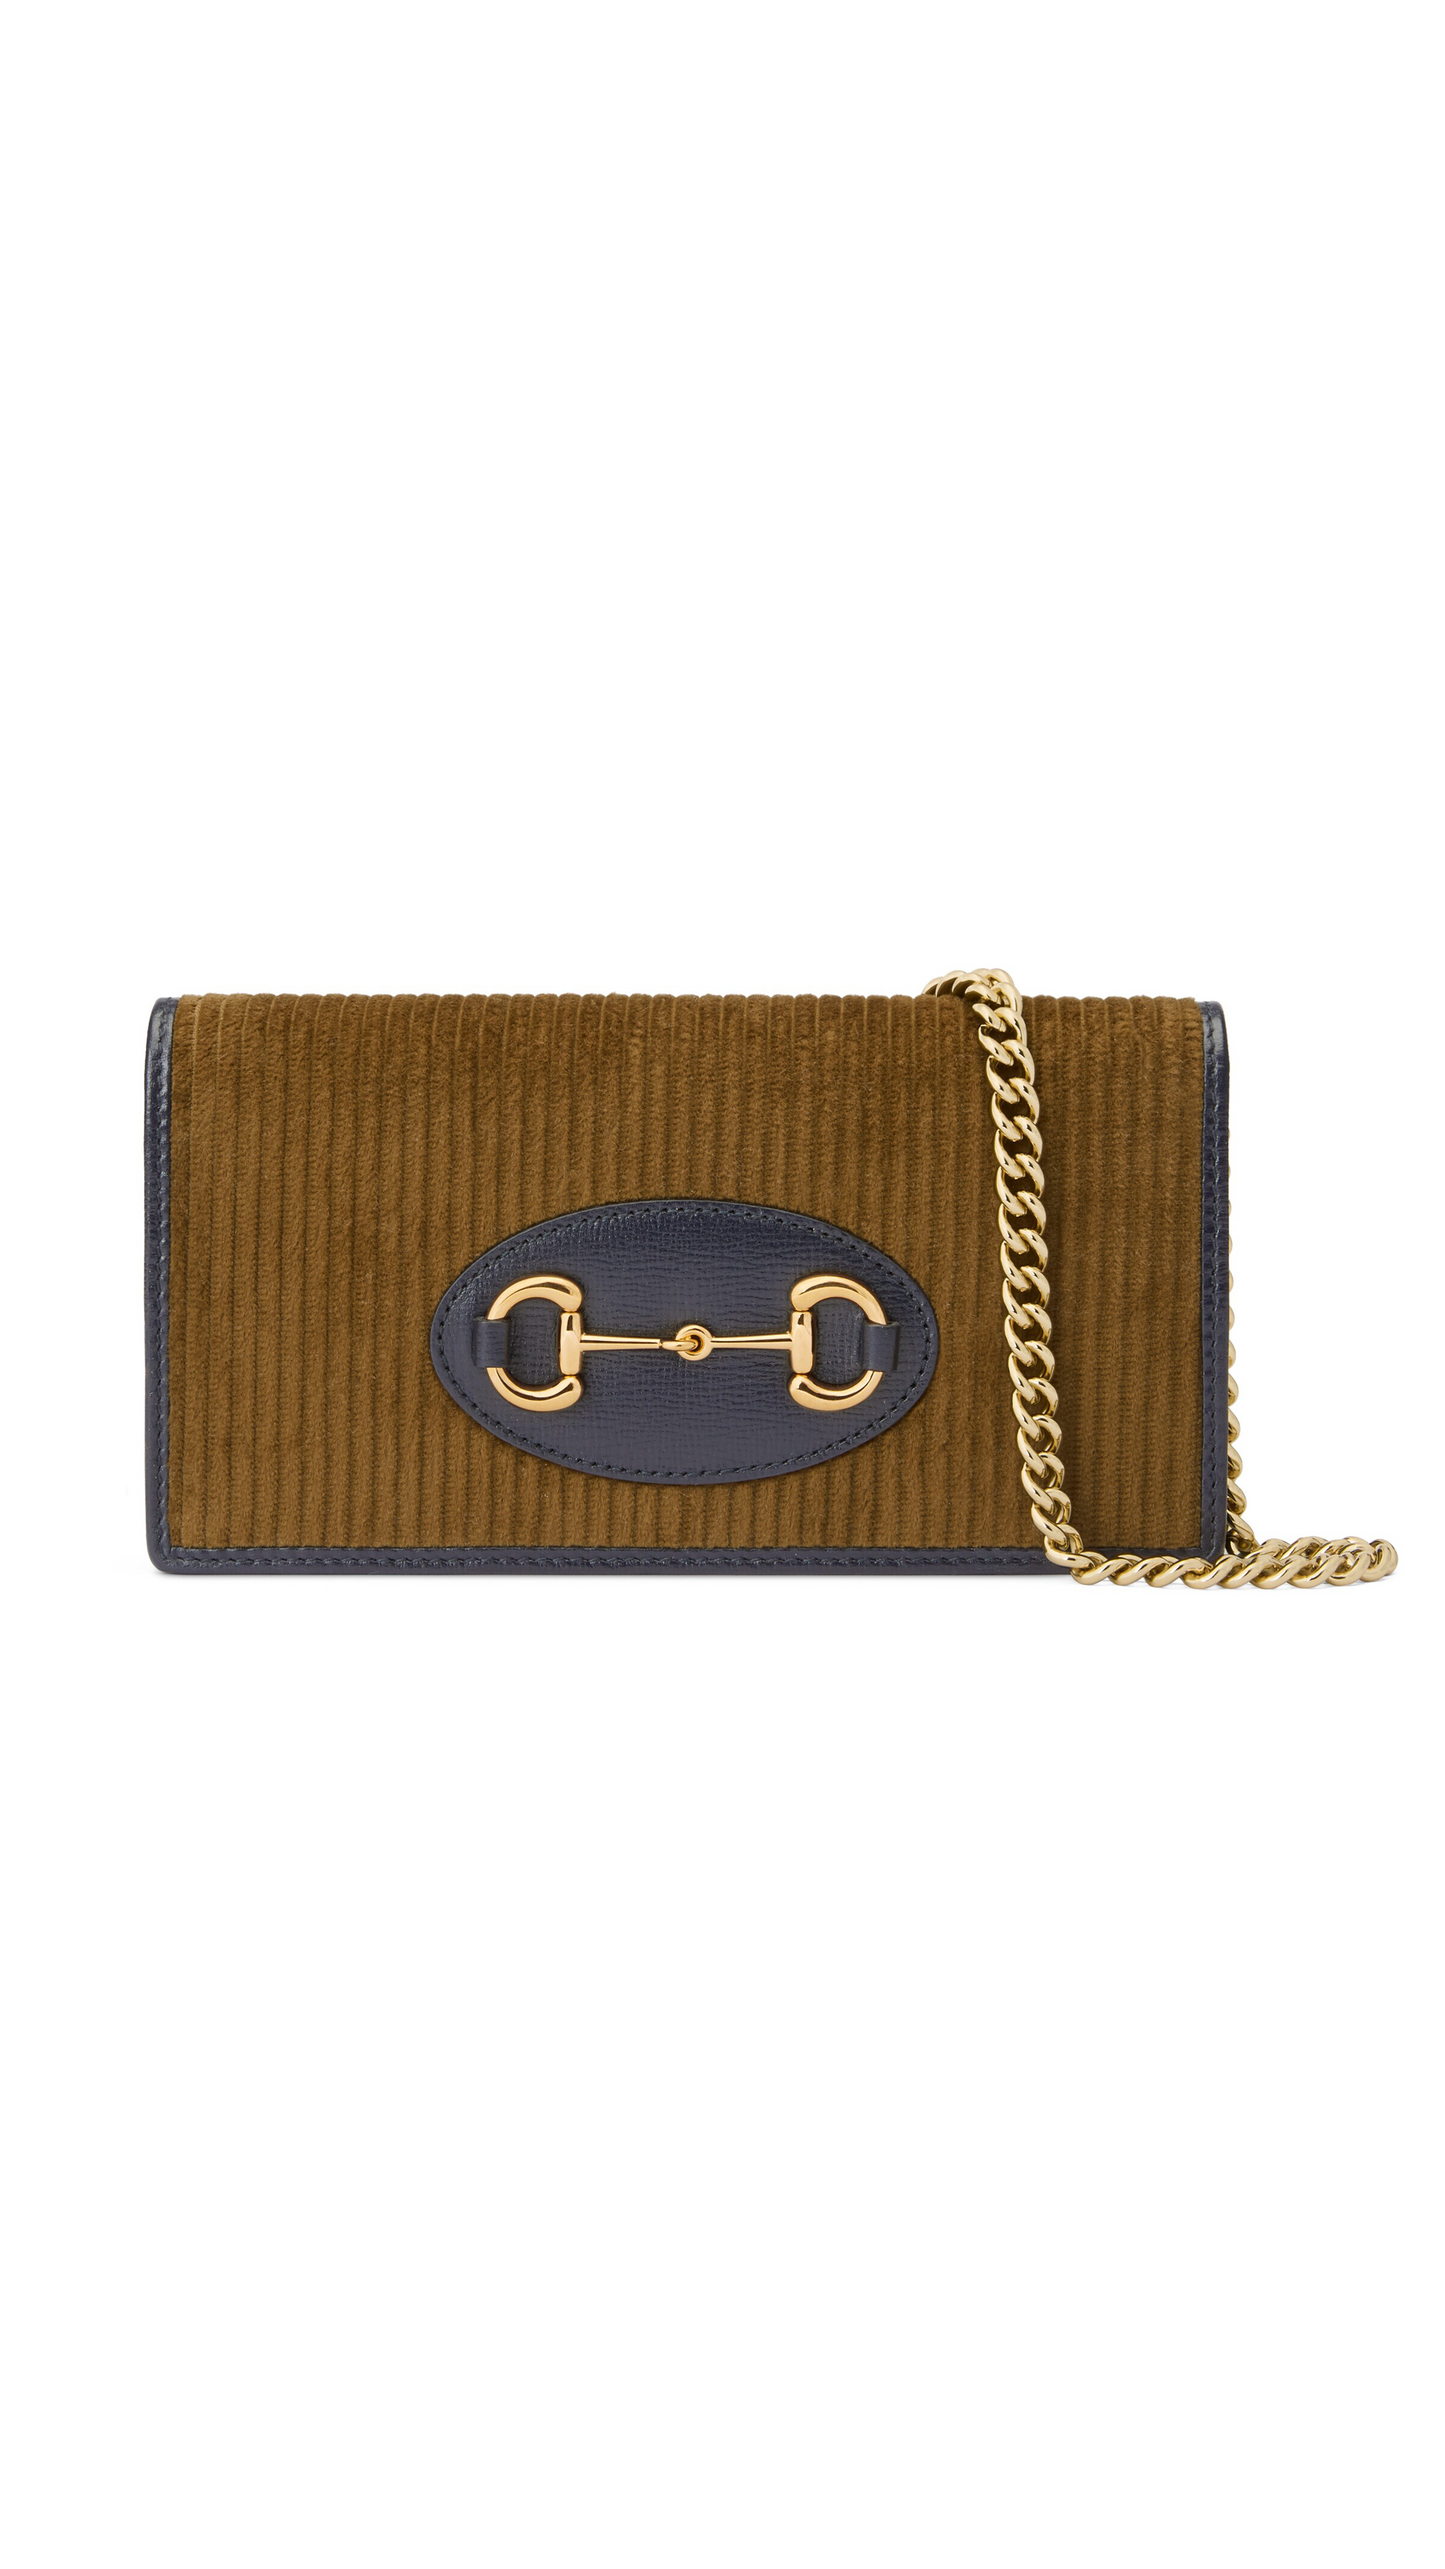 Gucci Horsebit 1955 Wallet with Chain - Brown